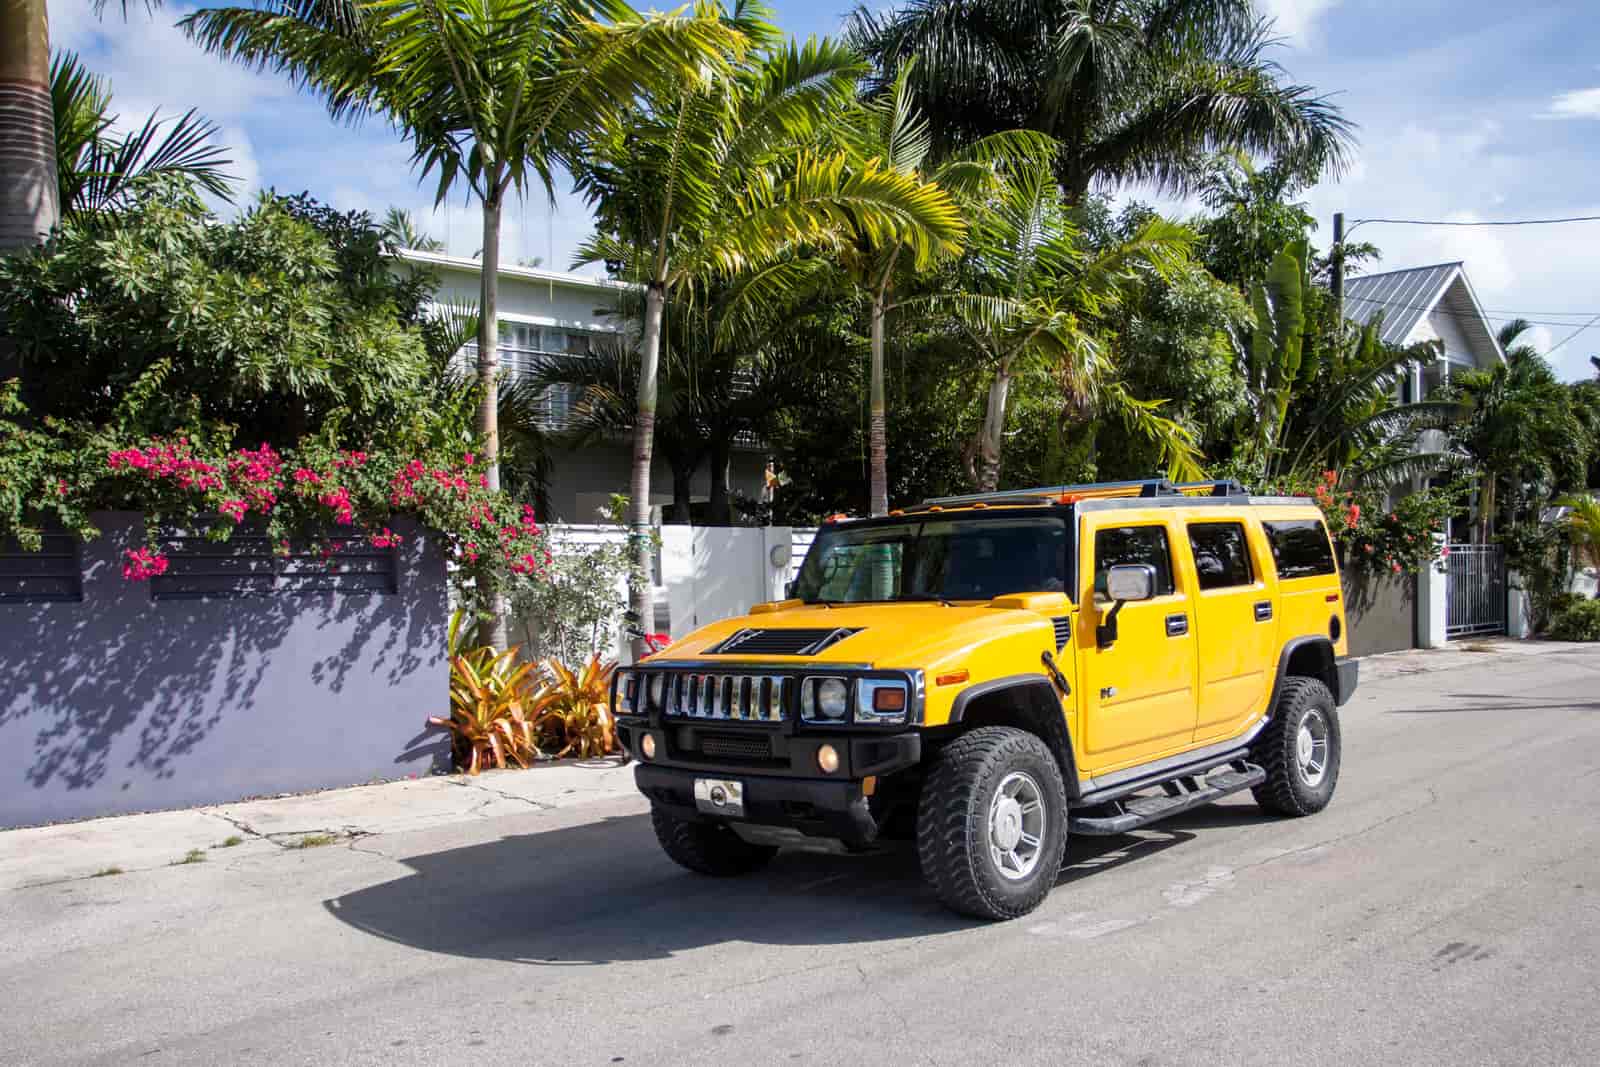 Are Hummers Reliable? How Long It Can Last? Here’s The Answer